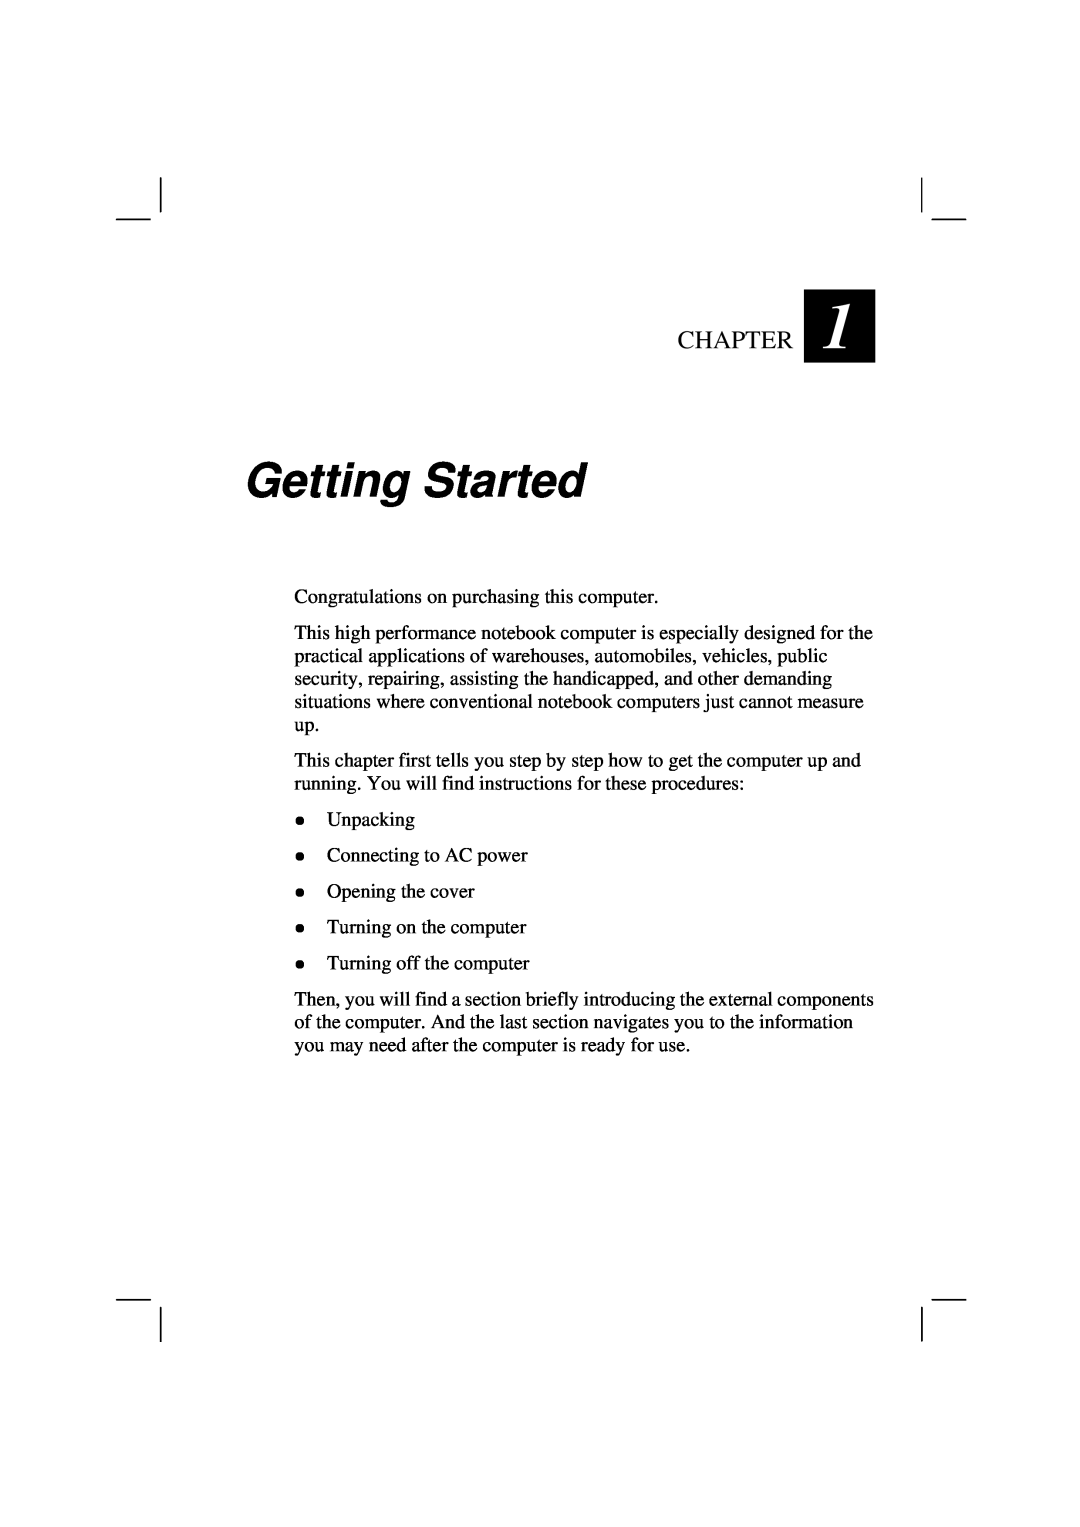 Casio HK1223 owner manual Getting Started, Chapter 